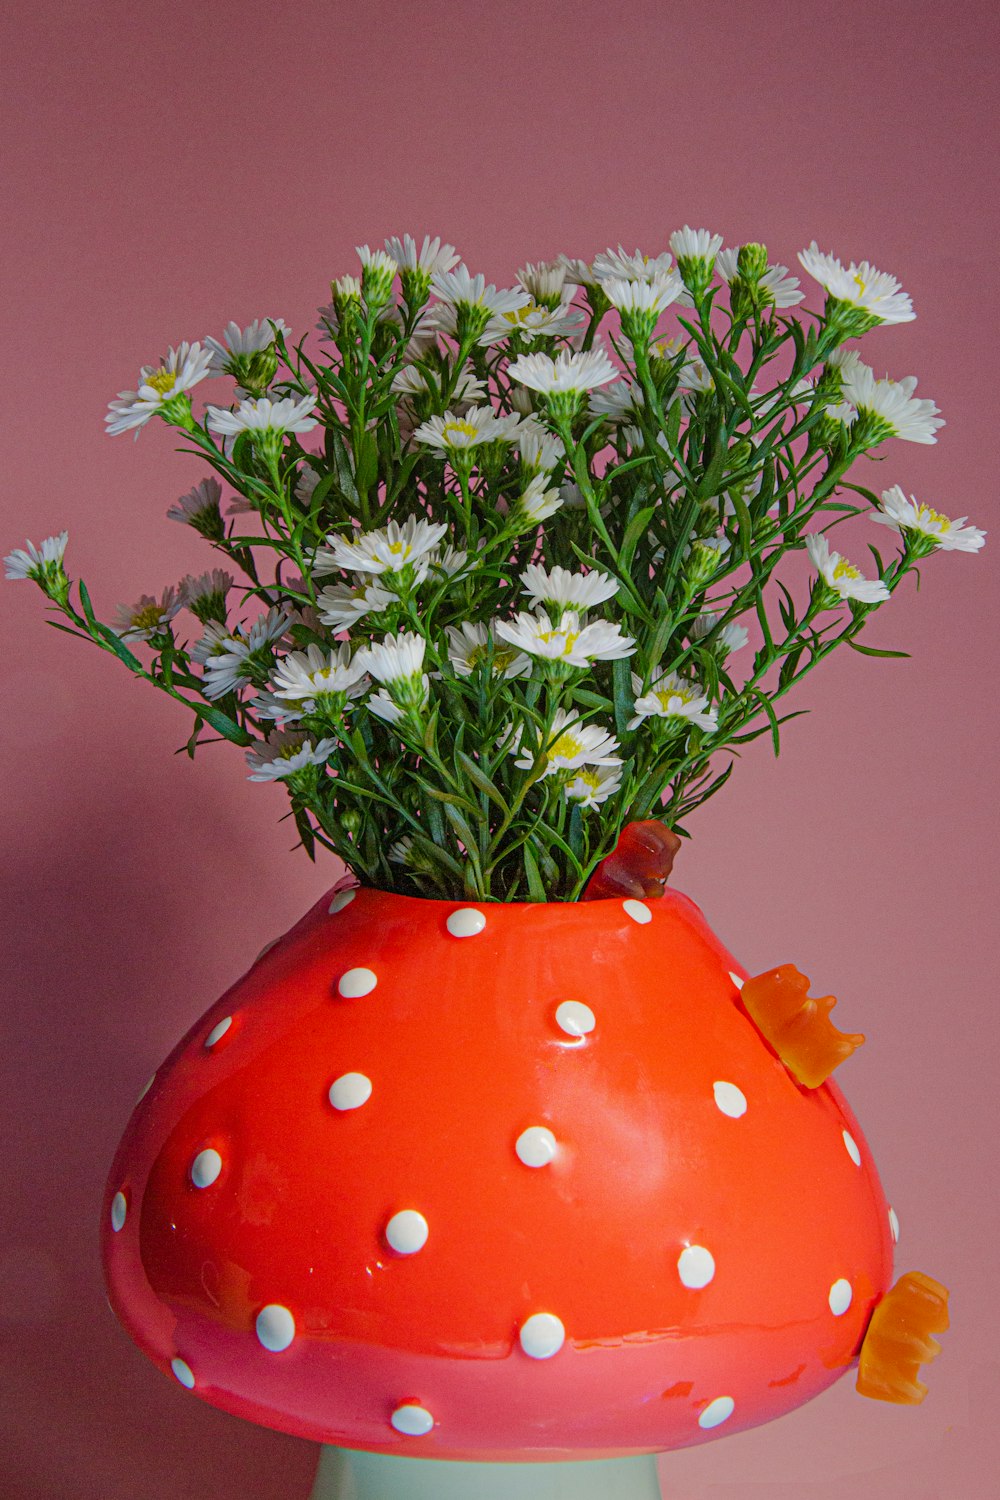 a mushroom vase with daisies and daisies in it